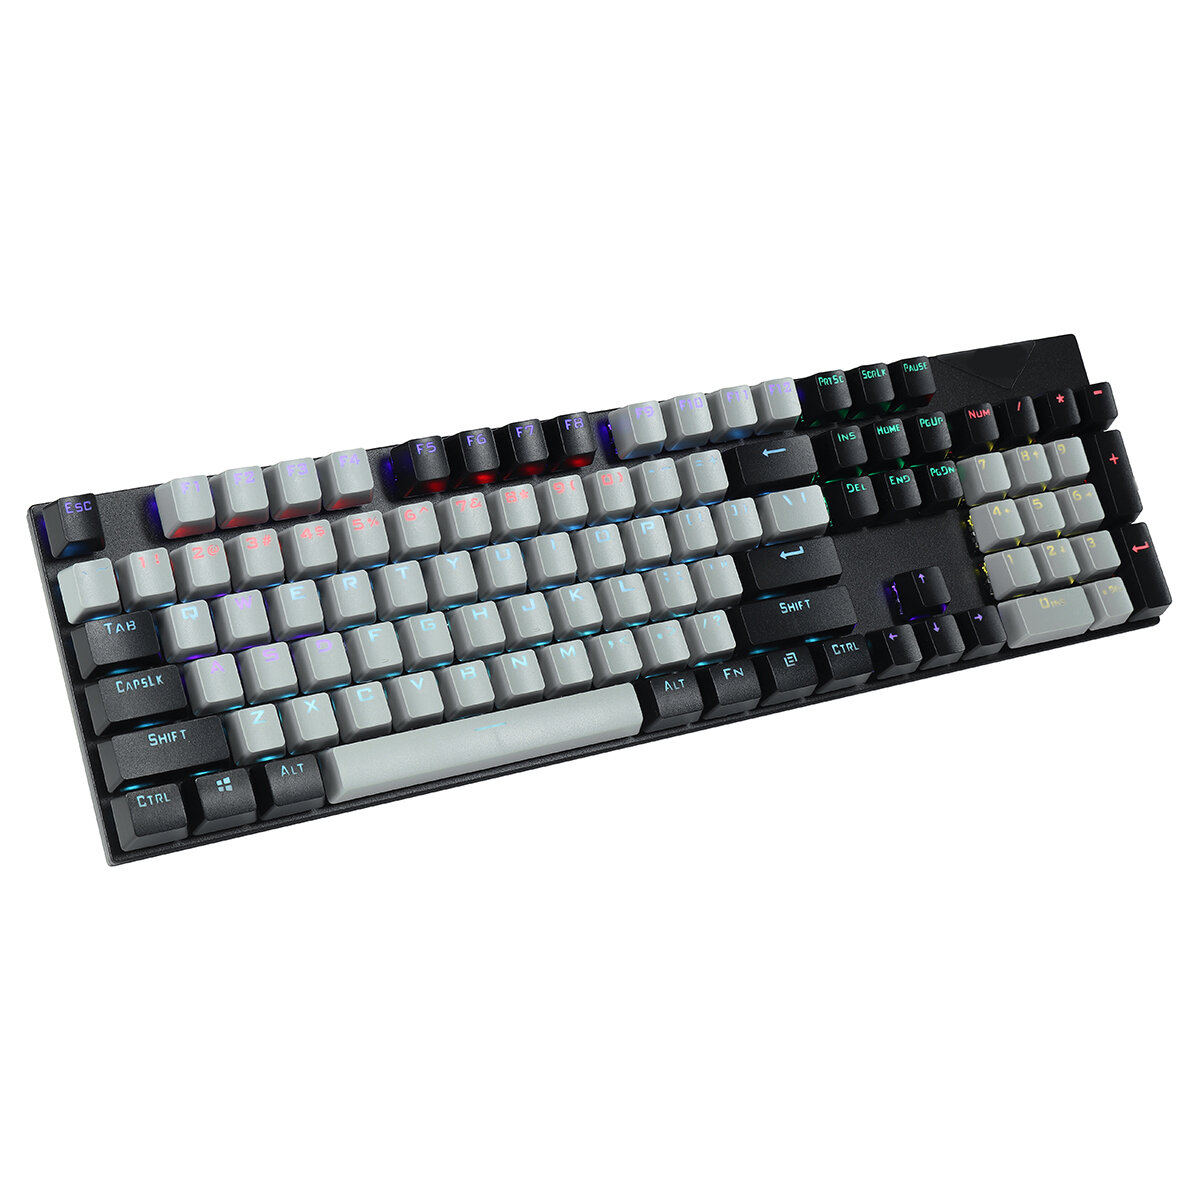 KB168 Wired Mechanical Keyboard 104-Key Conflict-Free Keys Suspend ABS Keycaps Blue Switch RGB Backlit Mechanical Gaming